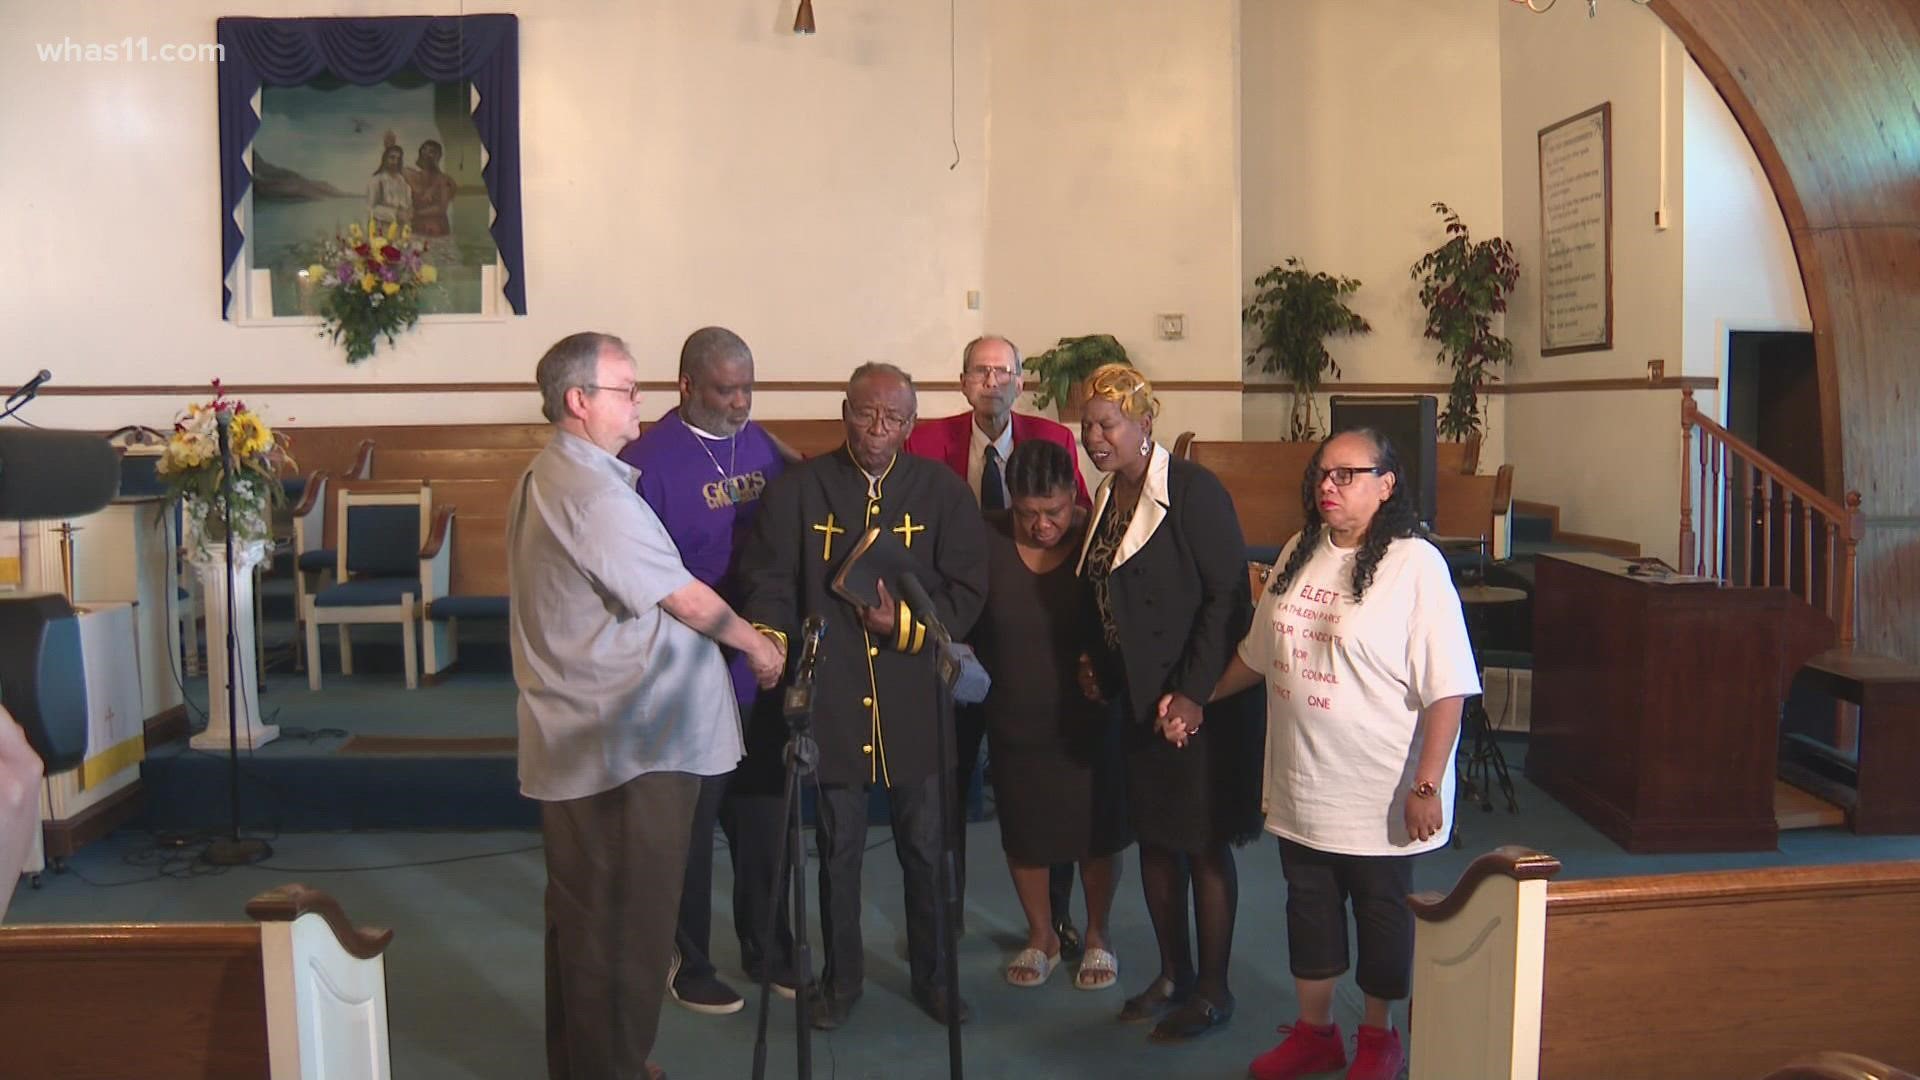 Prominent church leaders called for the end to the senseless violence happening across the country including right here at home.